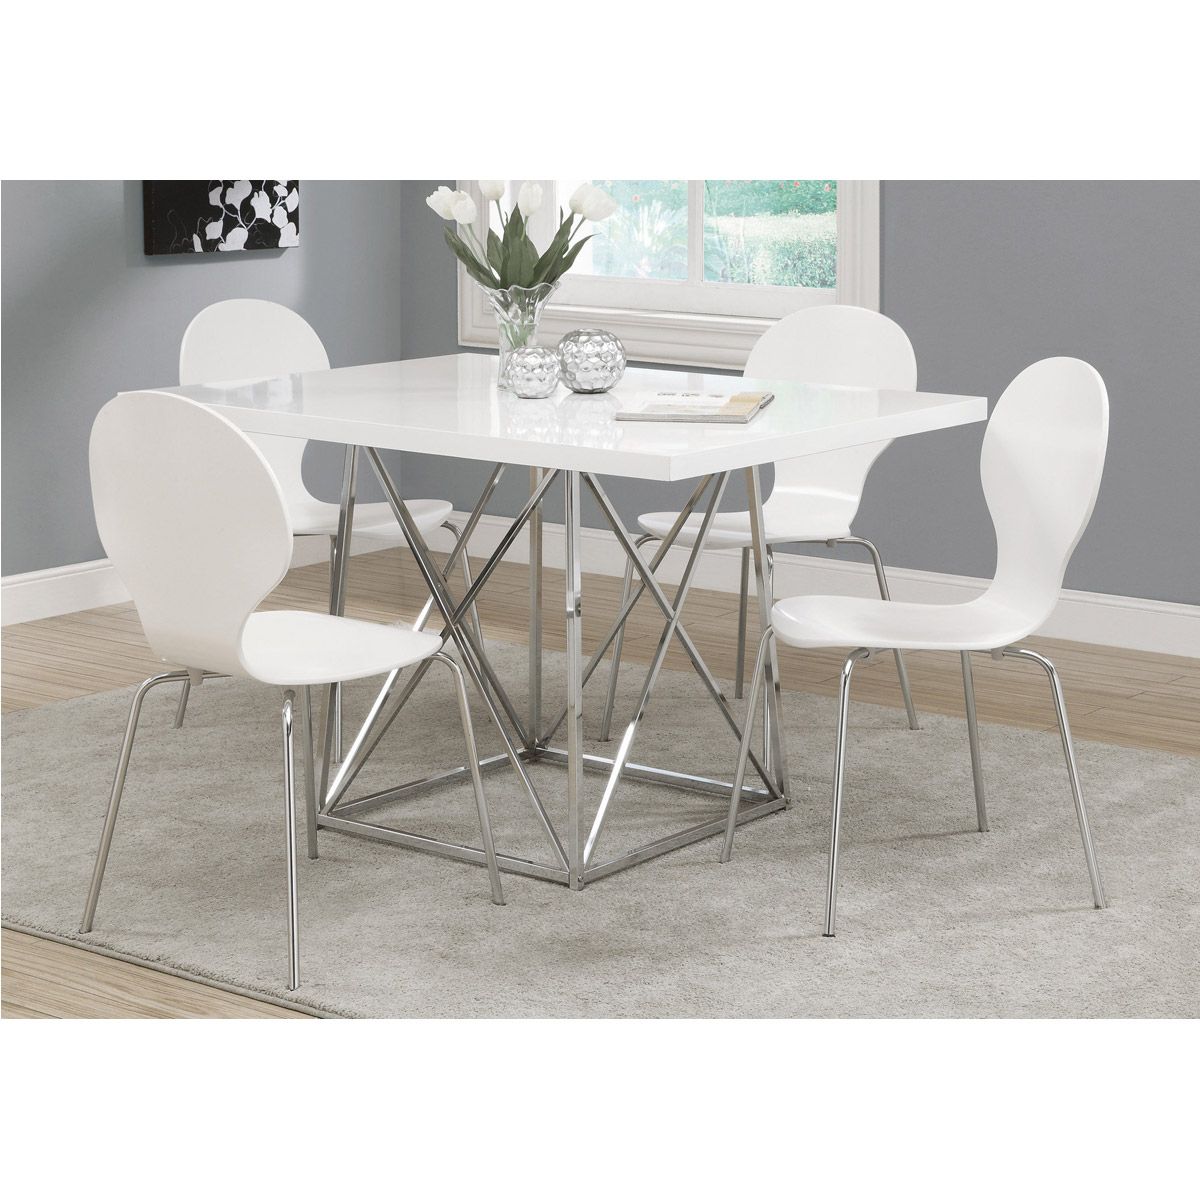 2019 Pevensey 36'' Dining Tables Intended For Decovio 15222 W Massena 48 X 36 Inch White Dining Table (View 5 of 20)